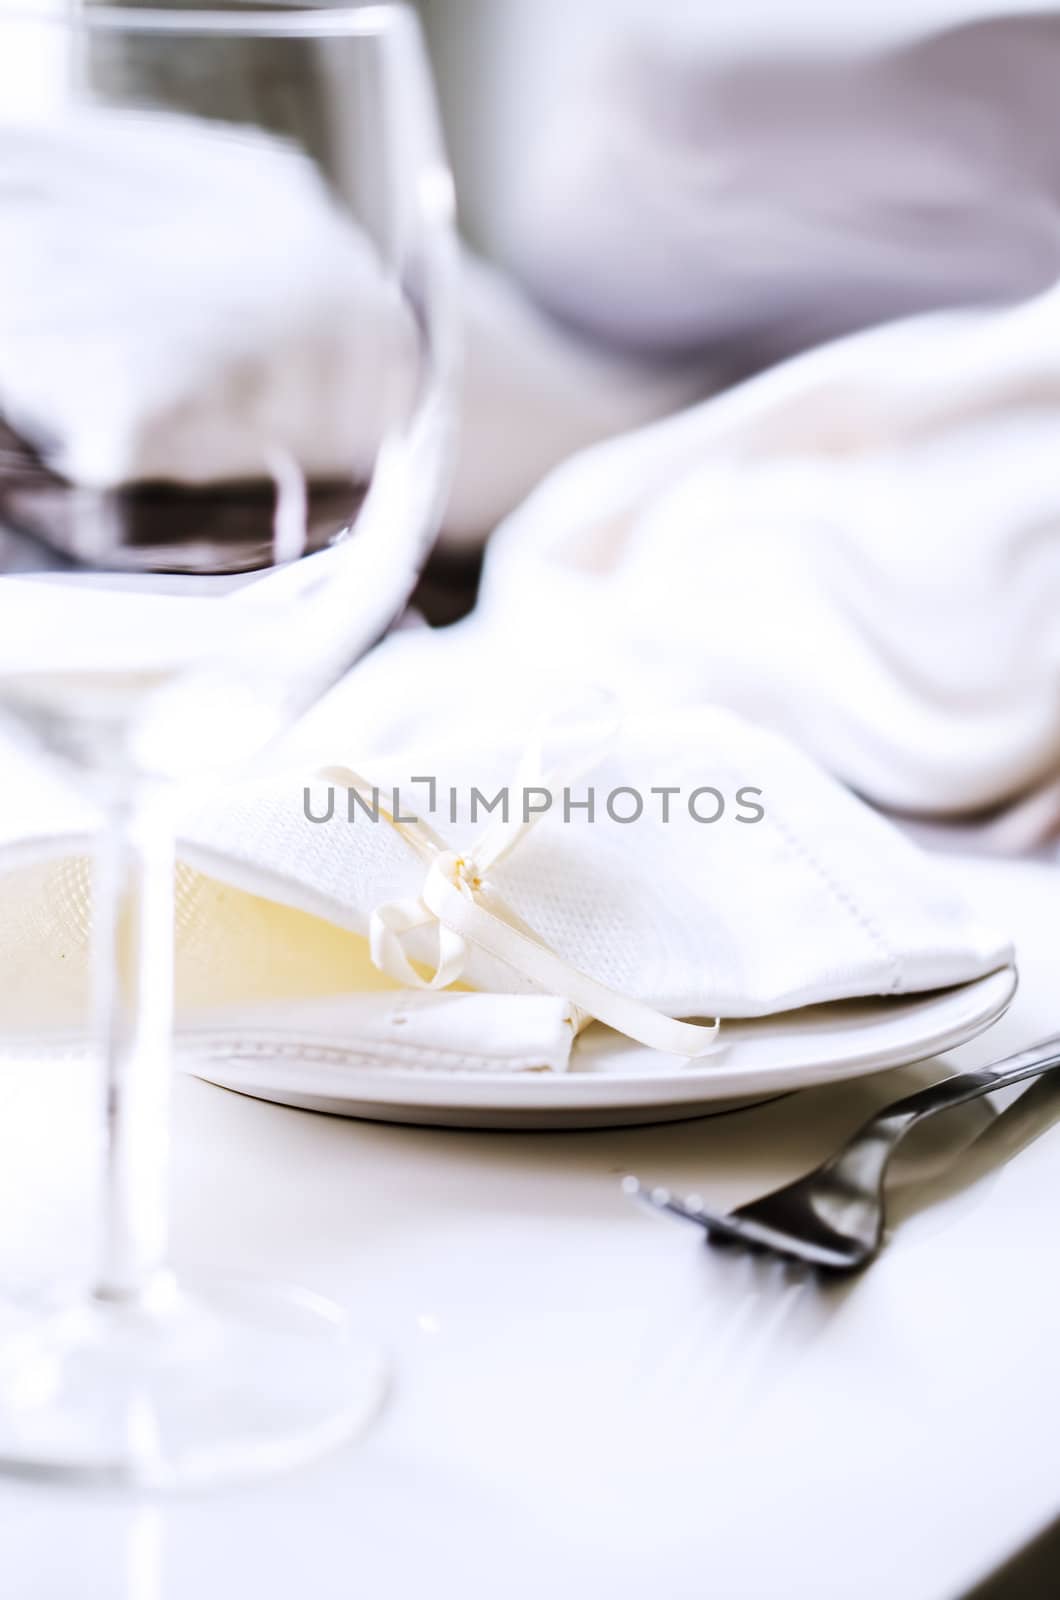 Tables set for meal in restaurant by Nanisimova